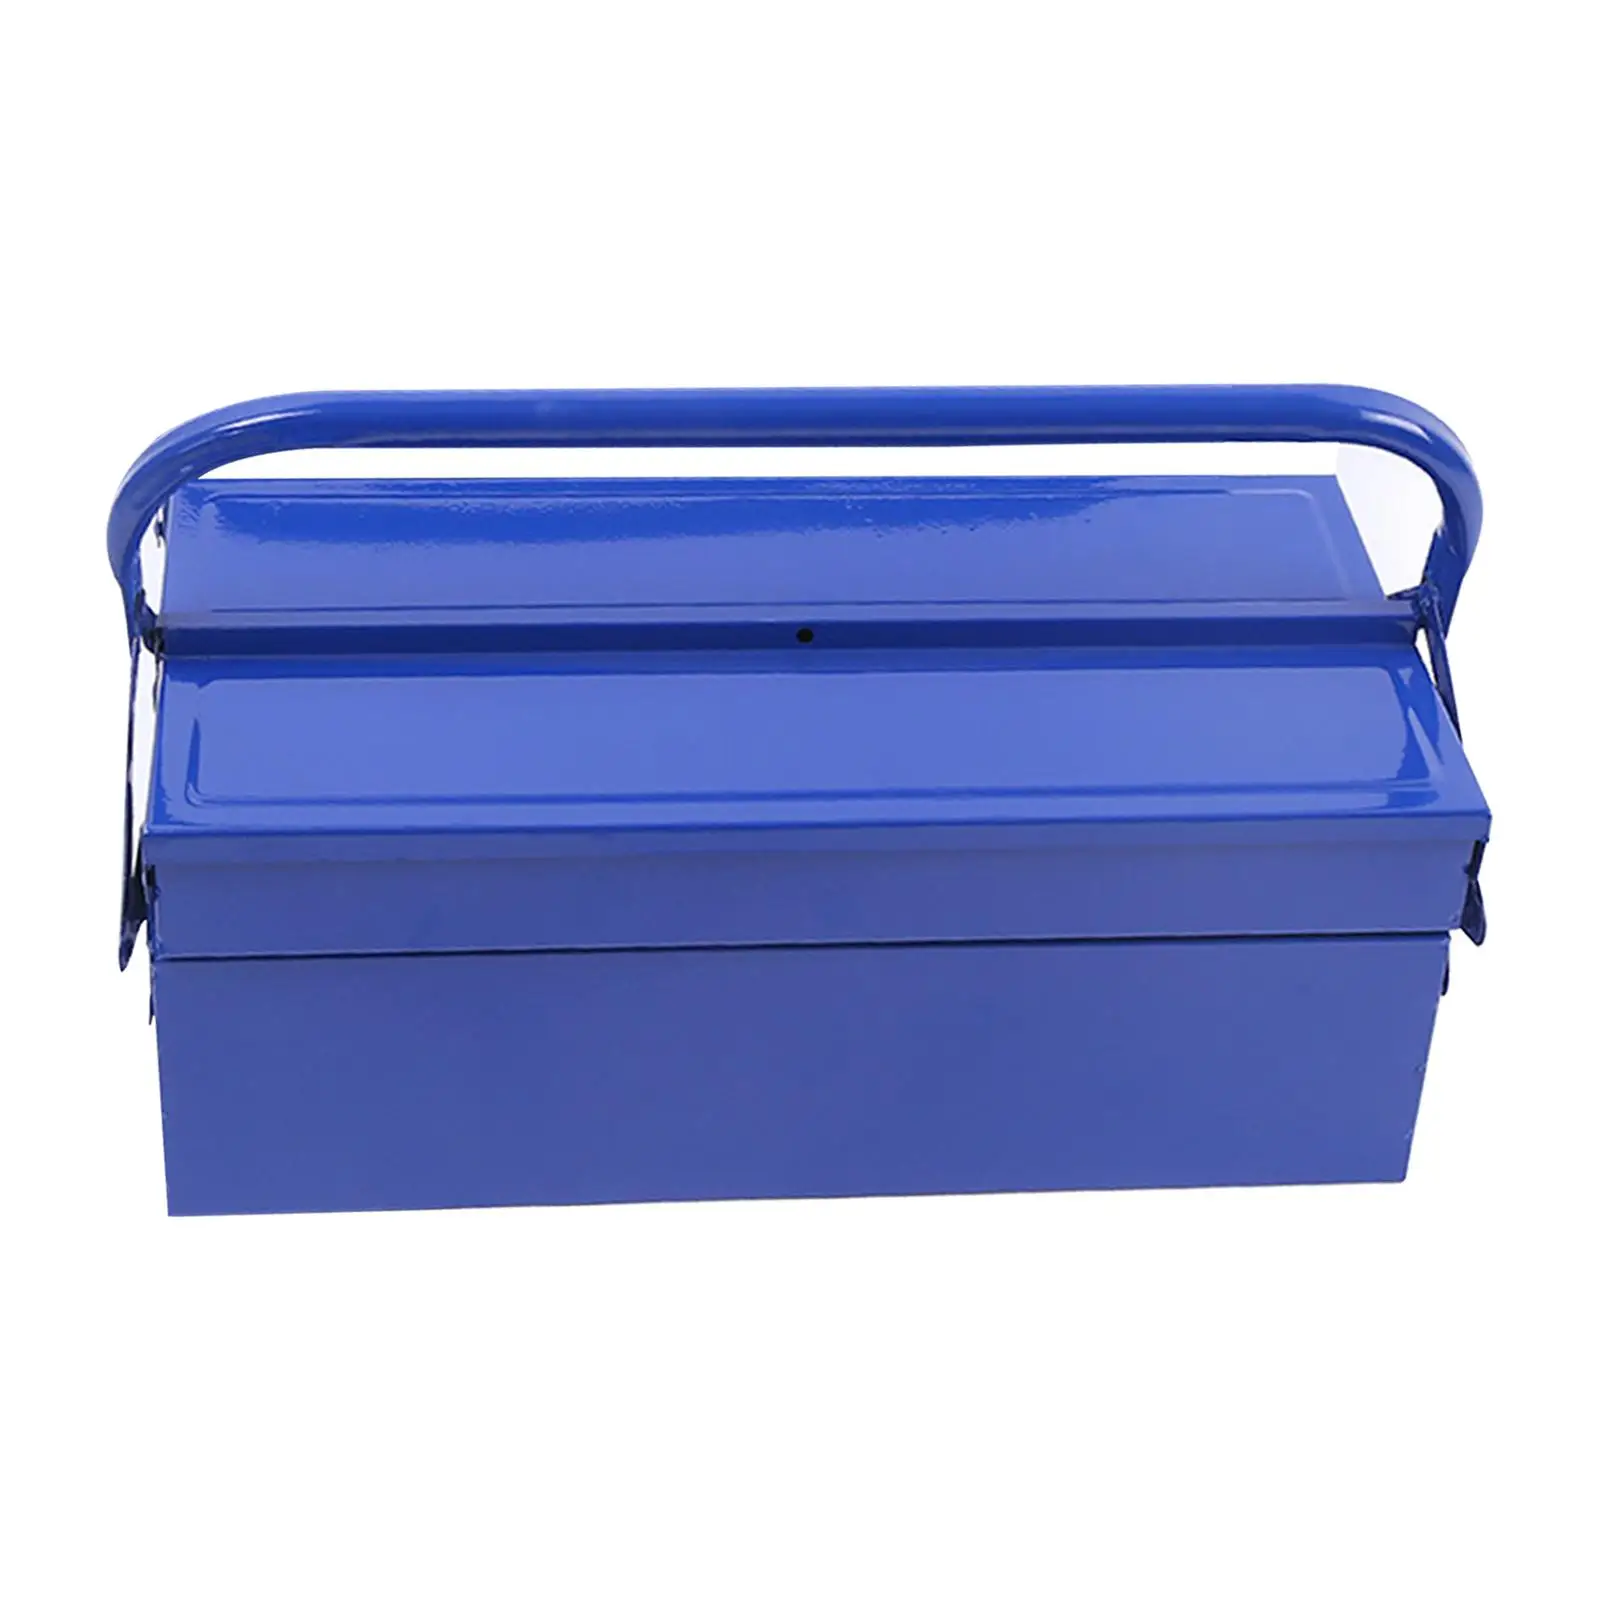 Toolbox Storage Box Durable Multipurpose Hand Tools Storage Repair Tool Storage Case Screw and Nuts Compartment Tray for Car